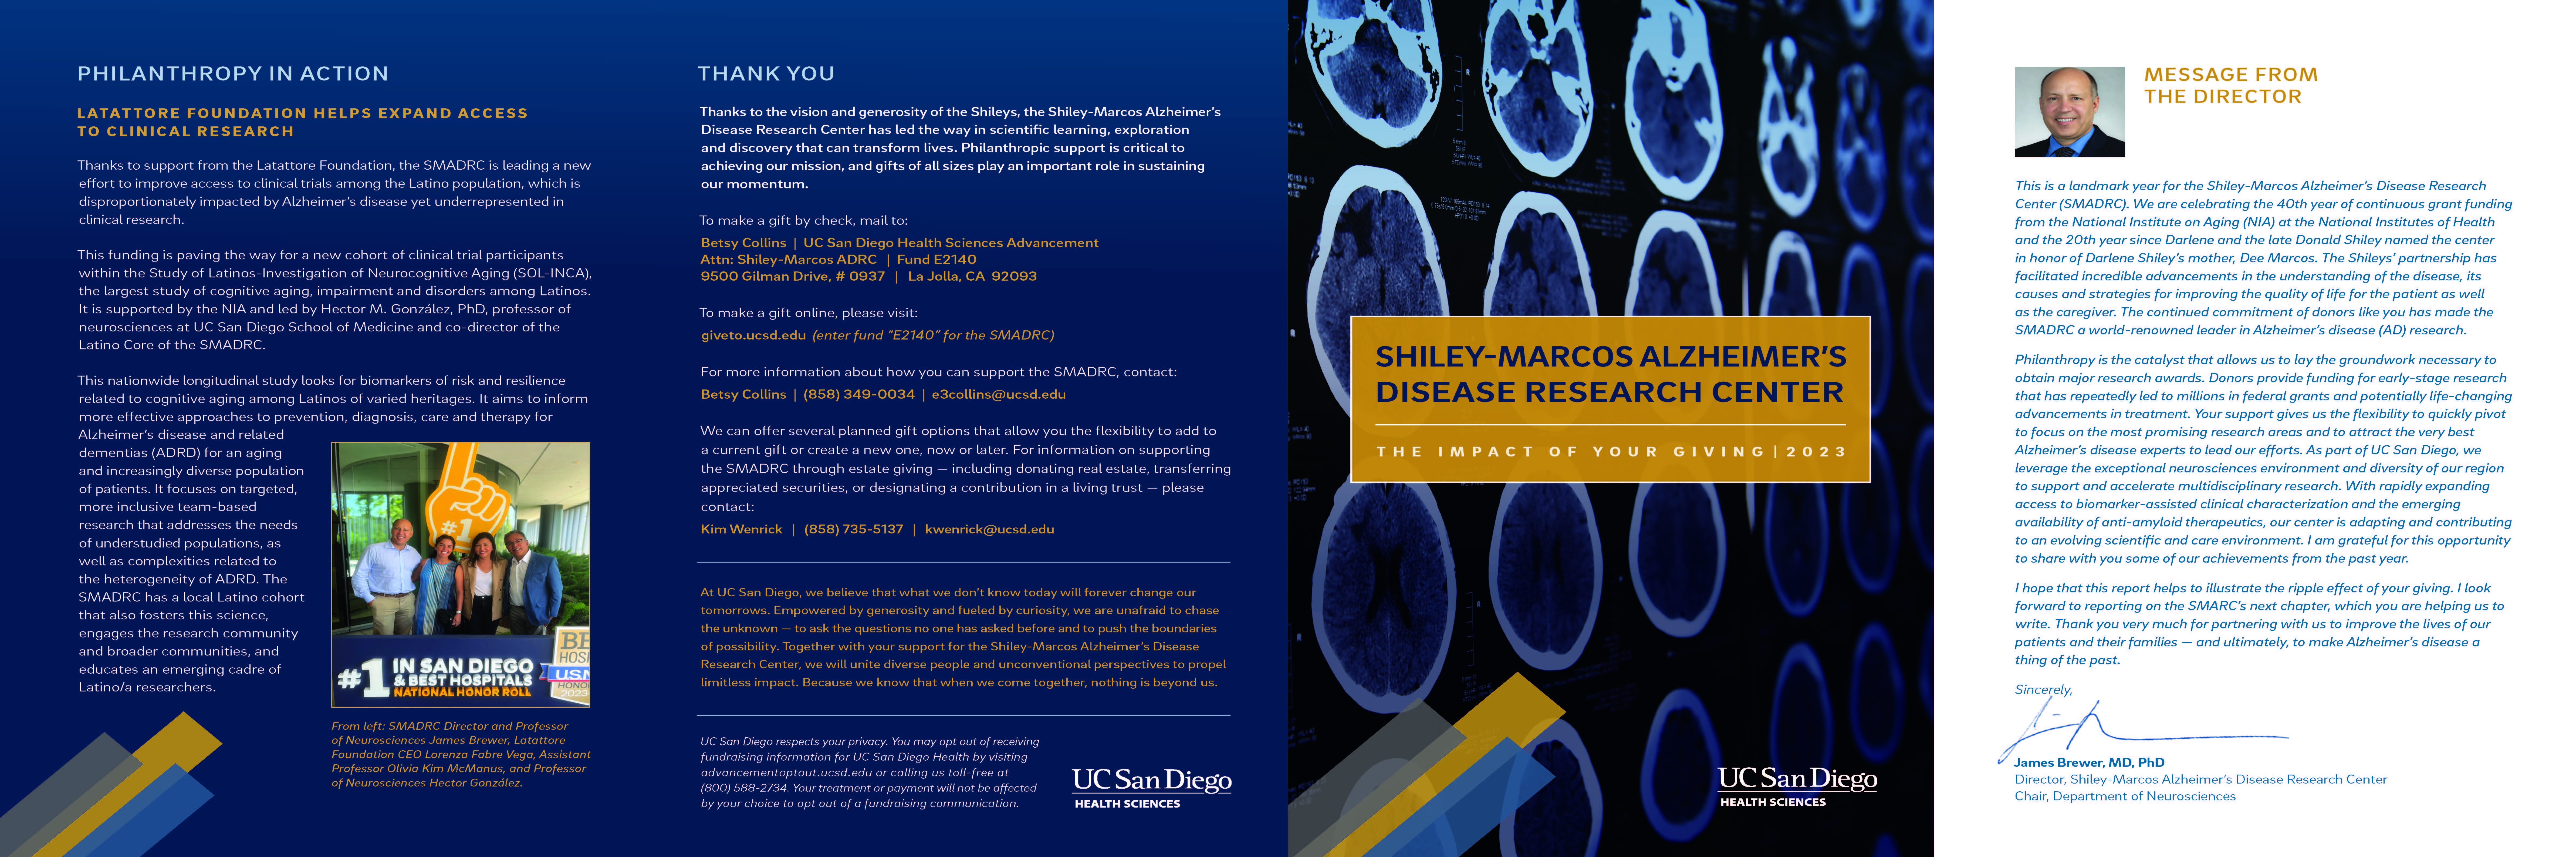 HSA_AS-Alzheimers-Fund-Impact-Report-2023_r2_Page_1.jpg